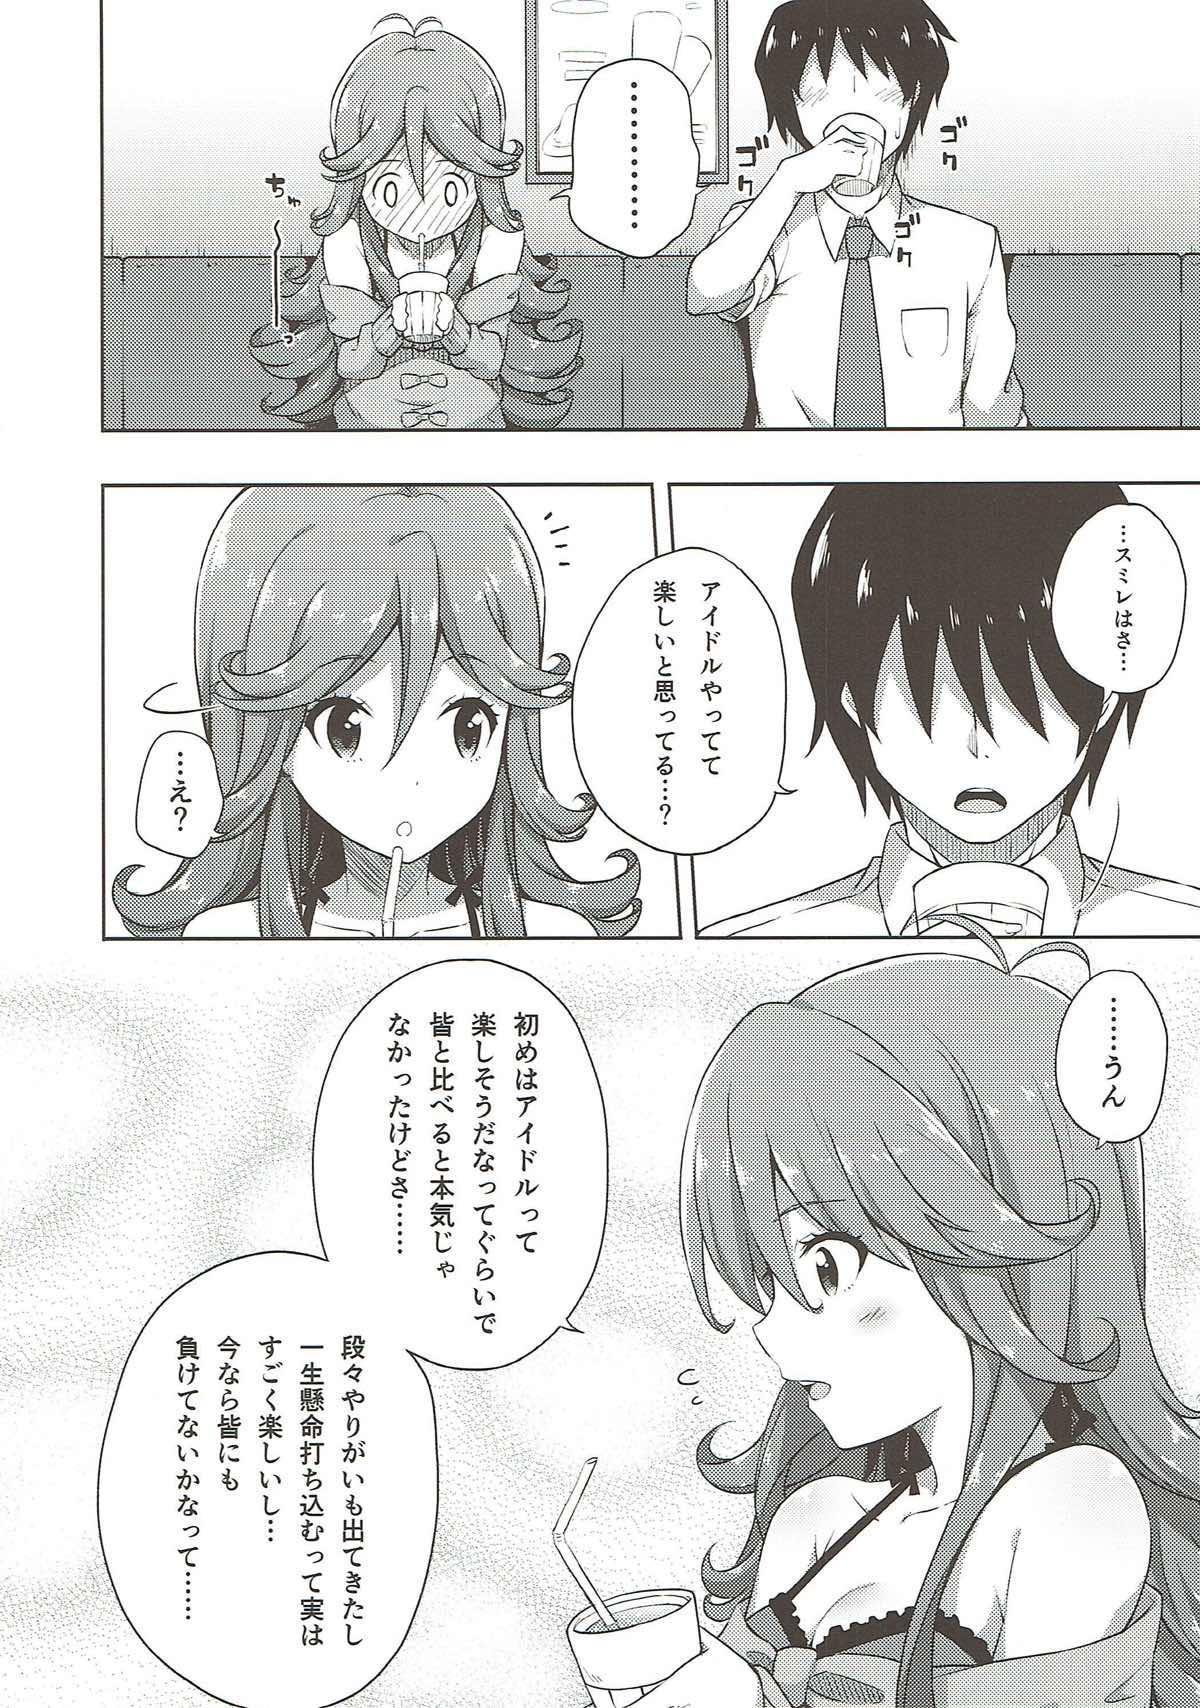 Hotfuck IMIWAKA IS NOT!! - Tokyo 7th sisters Eating - Page 5